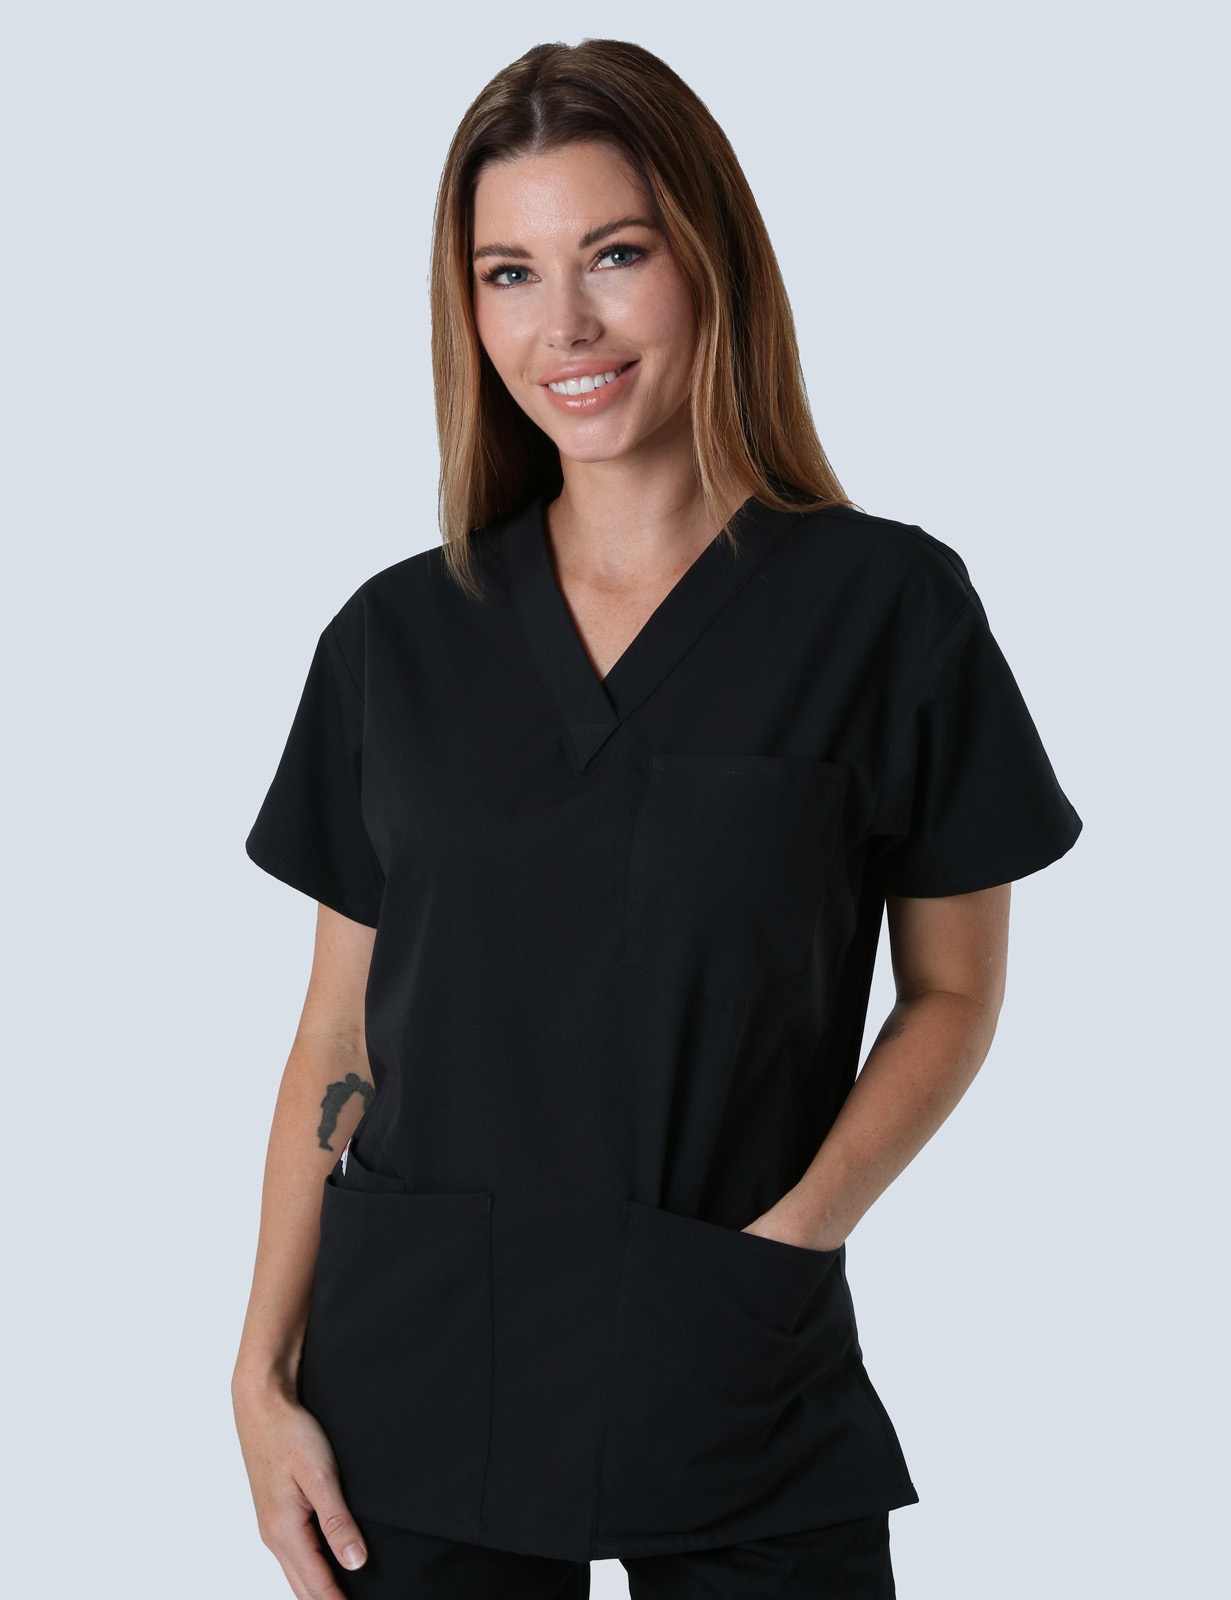 Northpark Private - ED RN (4 Pocket Scrub Top and Regular Pants in Black incl Logos)